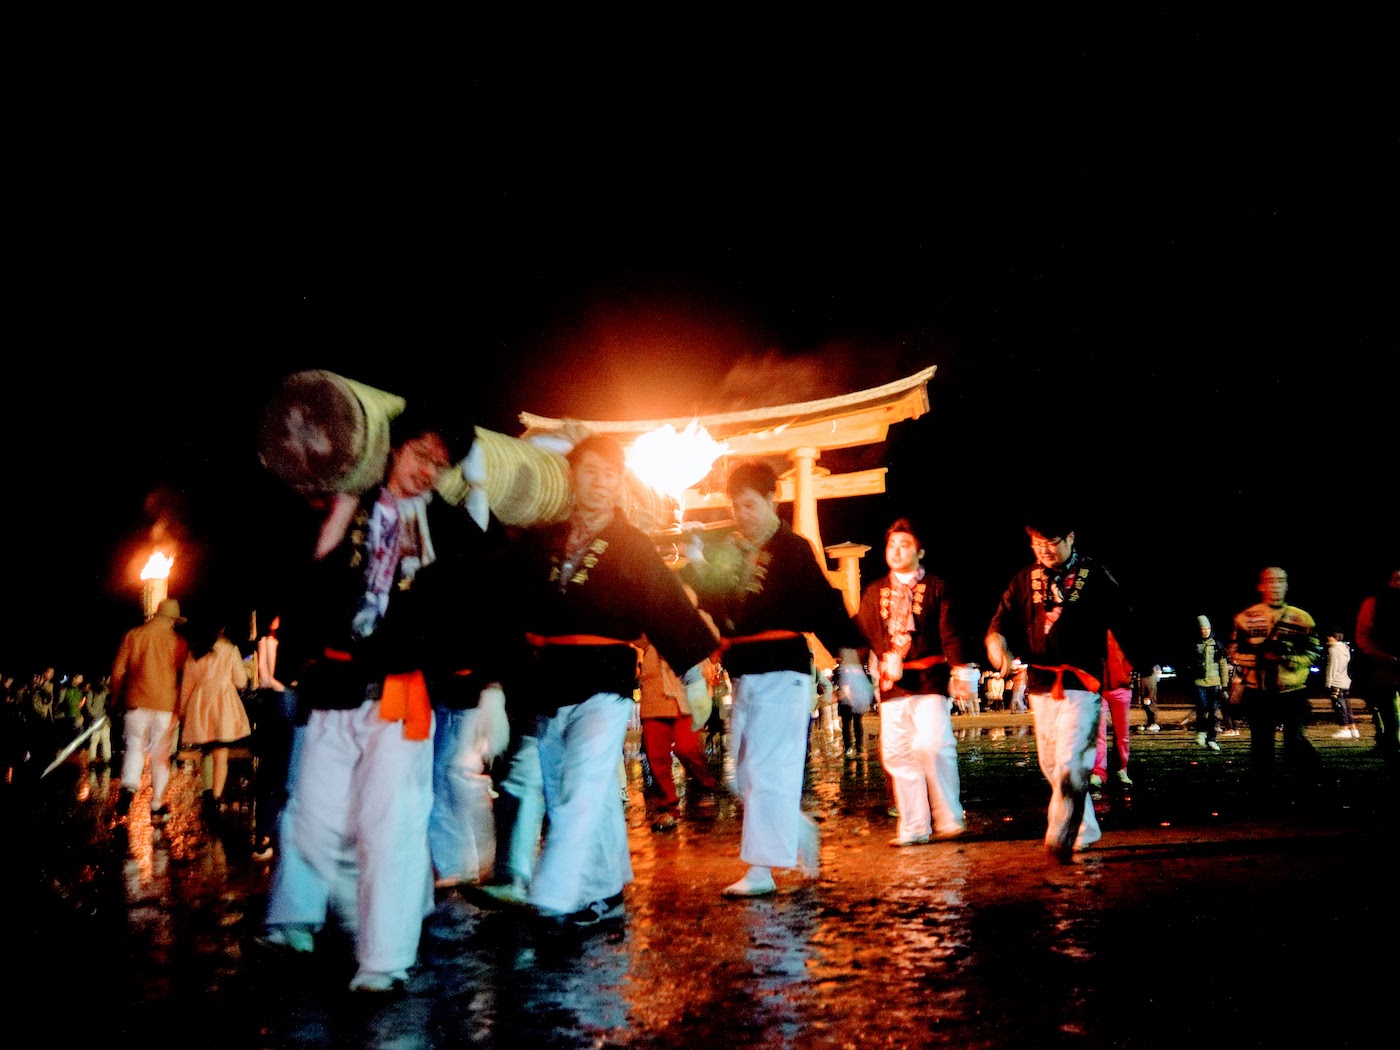 Torches paraded in front of the great torii gate